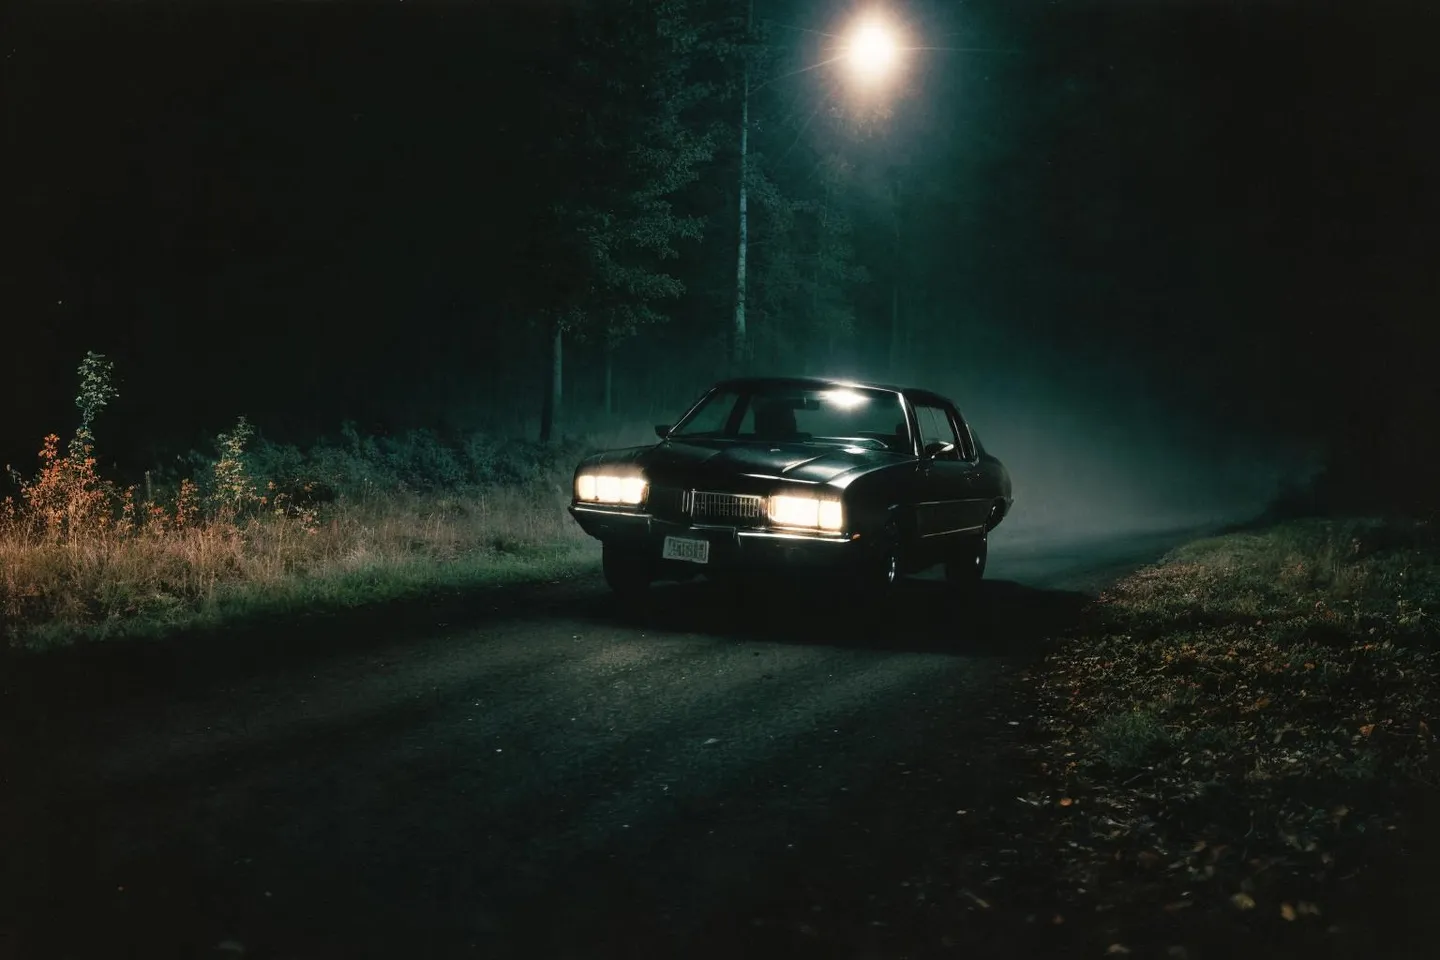 A vintage car with headlights on, driving on a dark and foggy road, surrounded by trees and illuminated by a single street lamp. This is an AI generated image using stable diffusion.